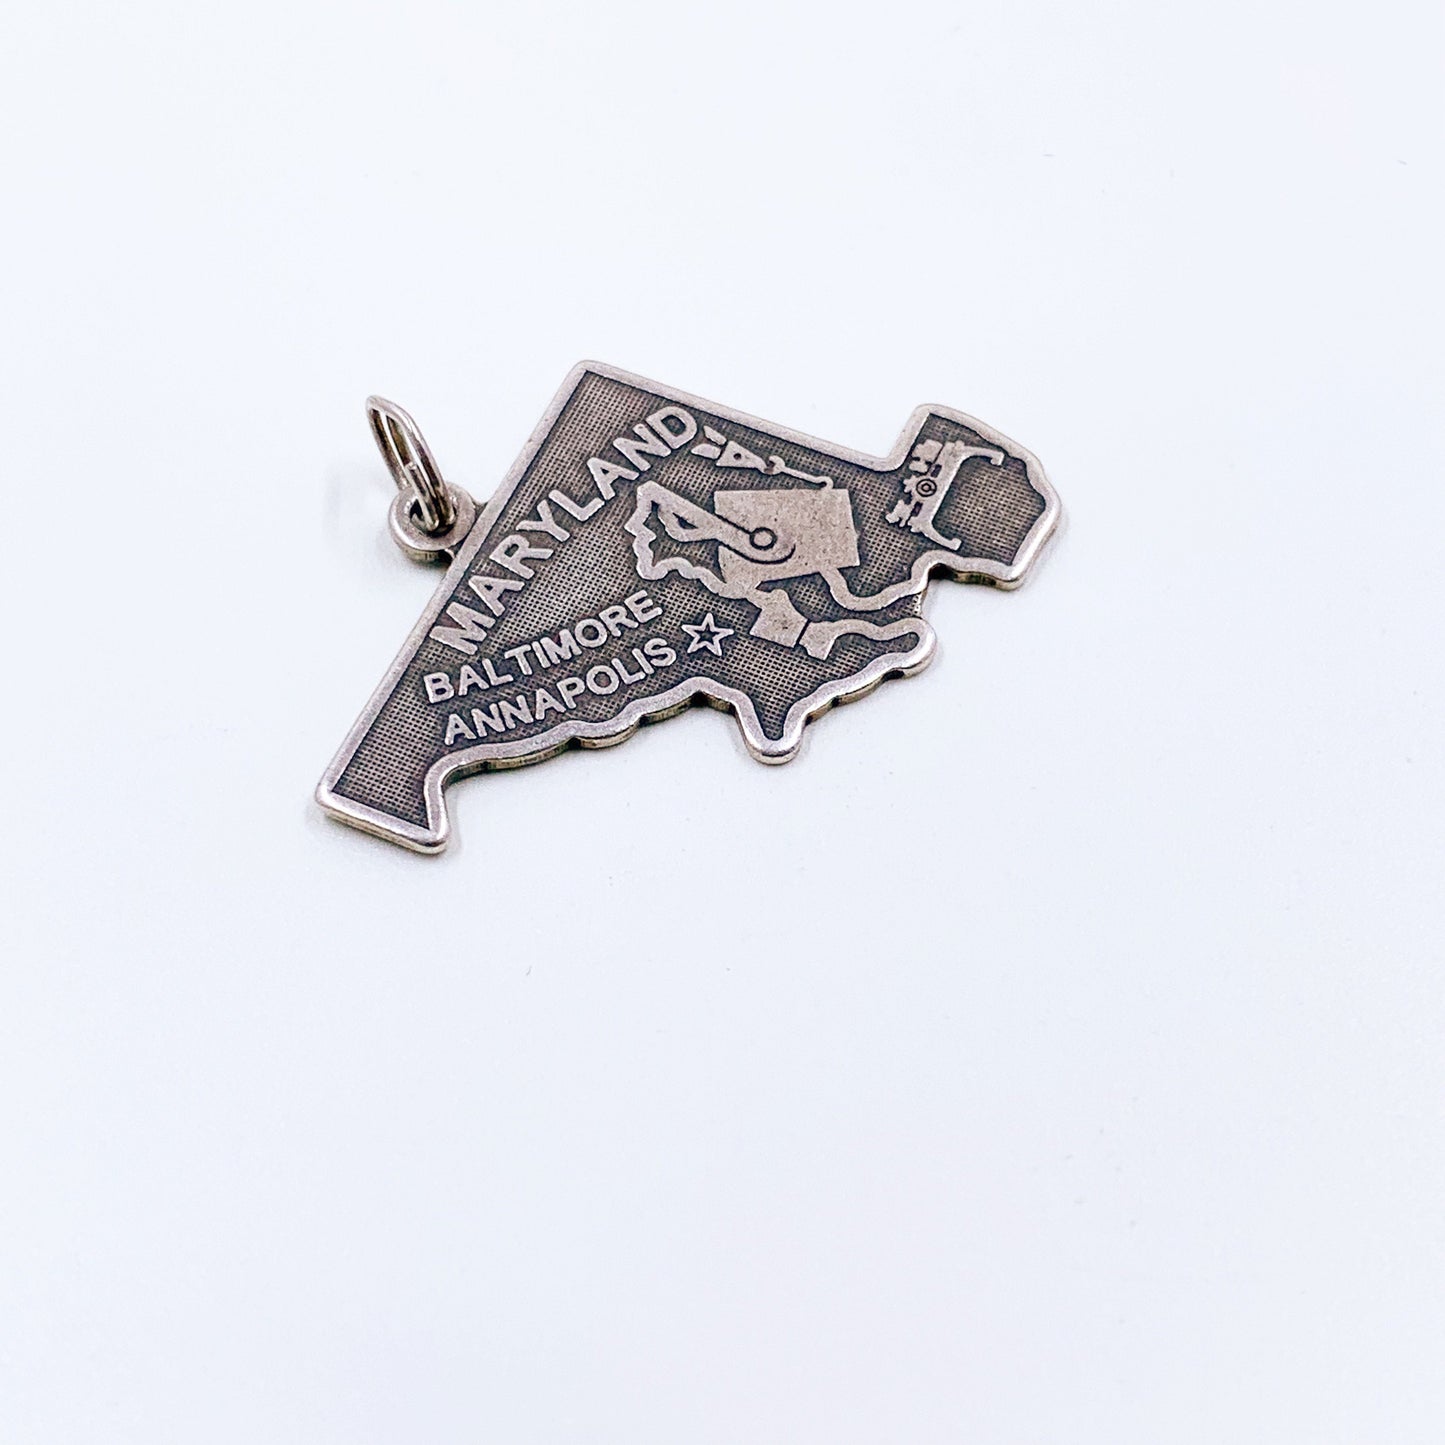 Vintage Maryland State Charm | Silver State of Maryland Charm